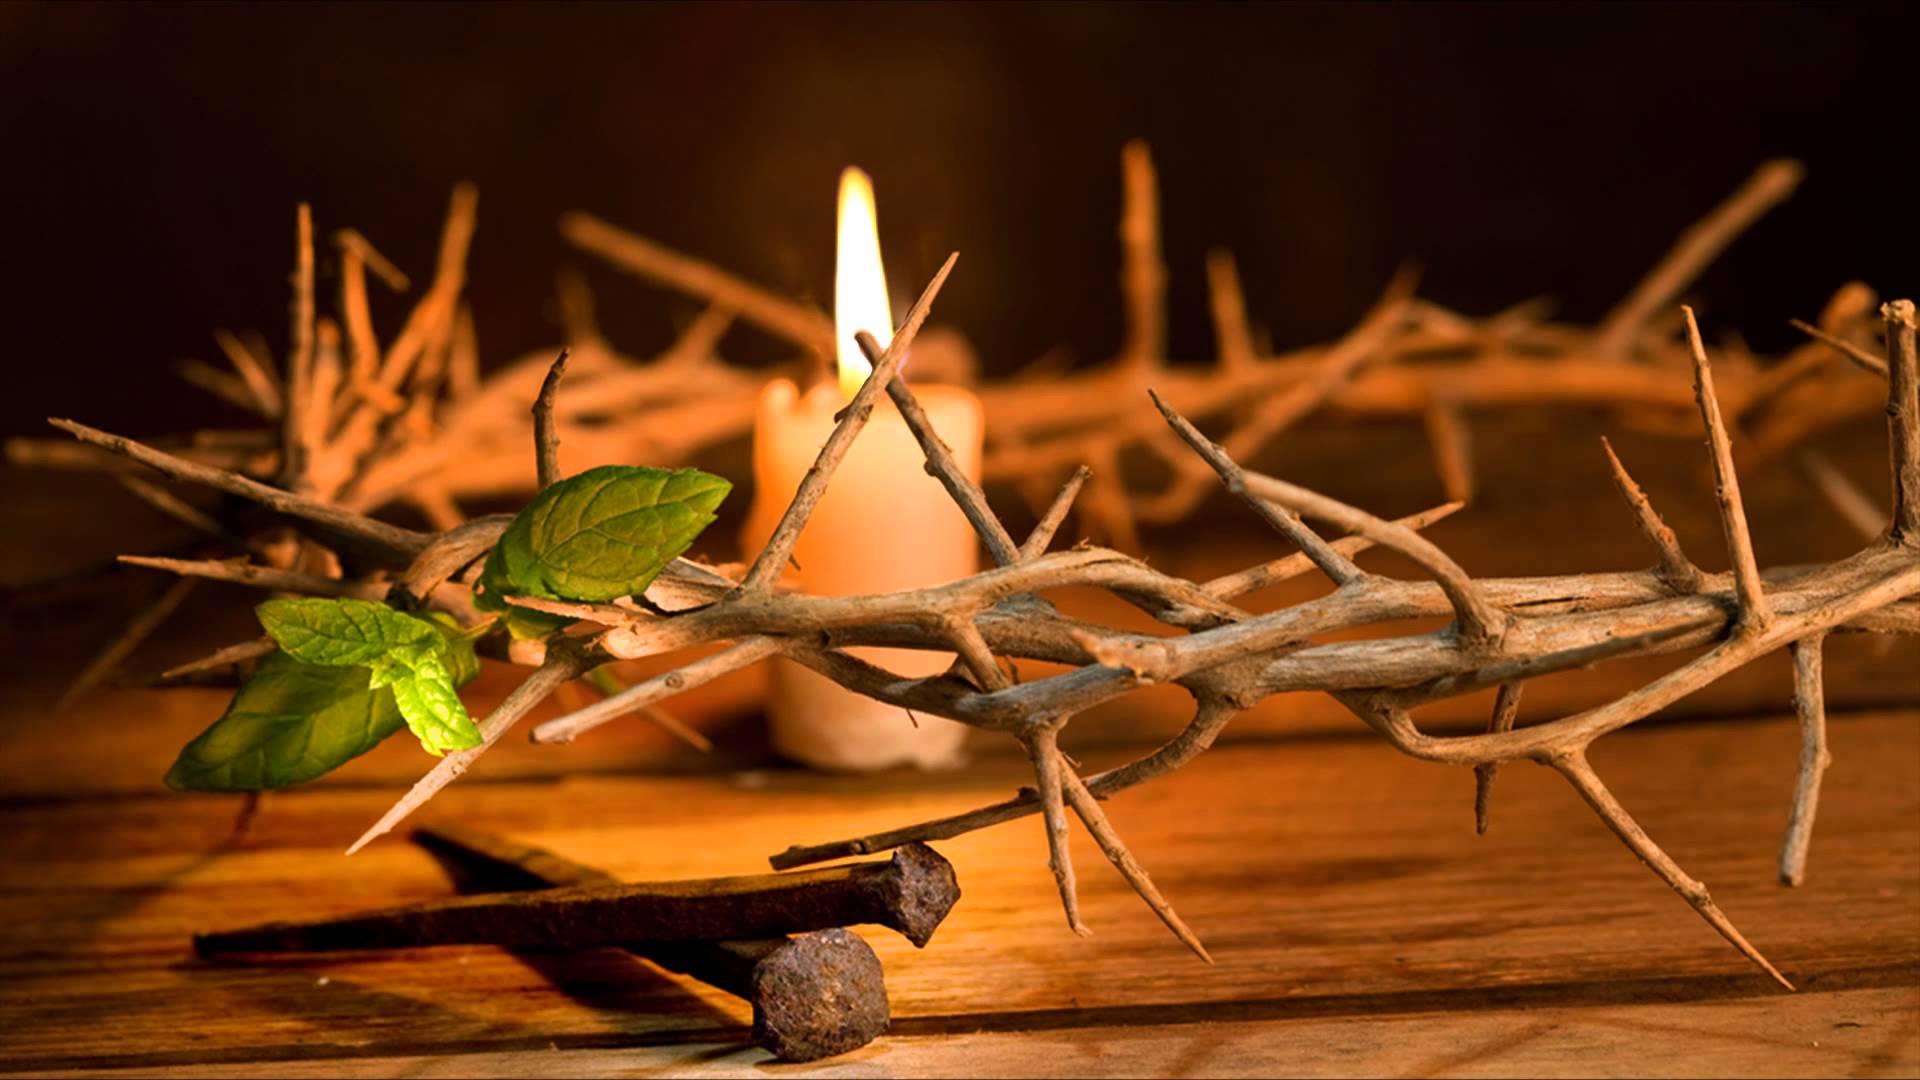 Jesus Christ Crown Of Thorns & Nails HD Wallpaper Download Free